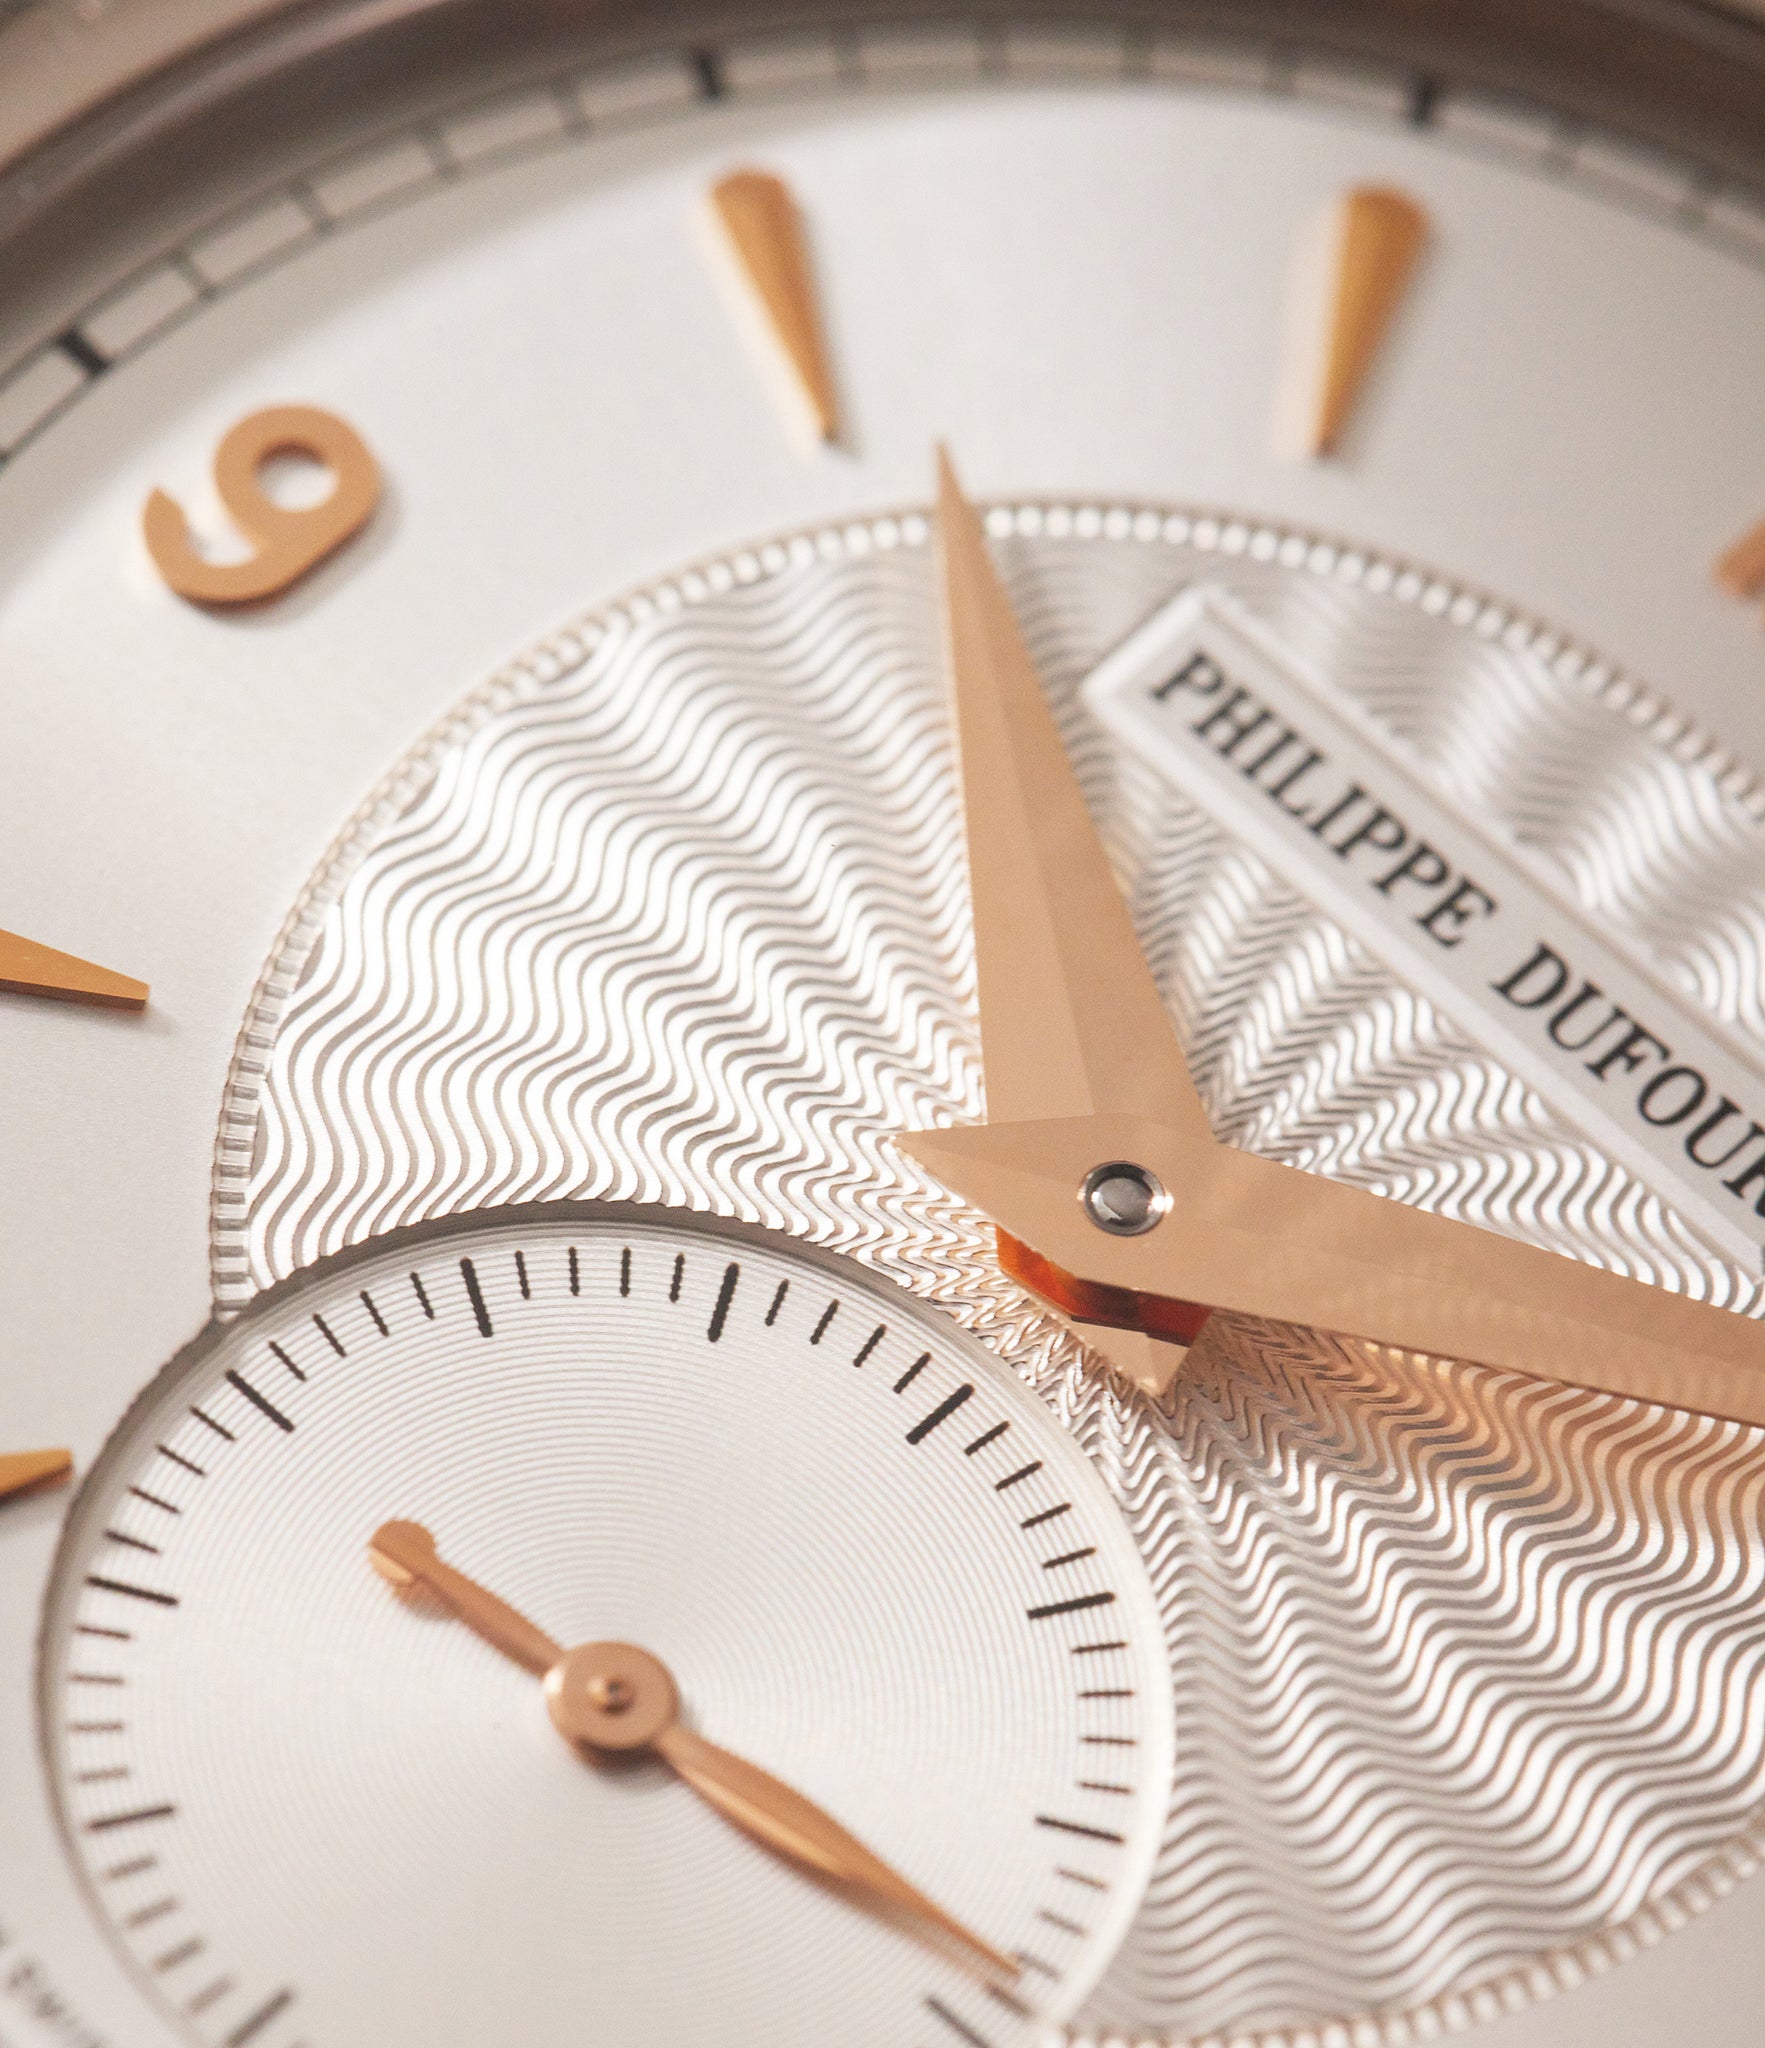 Philippe Dufour Simplicity | White Gold | Solid Silver Dial | Swiss handmade manual winding | A Collected Man London